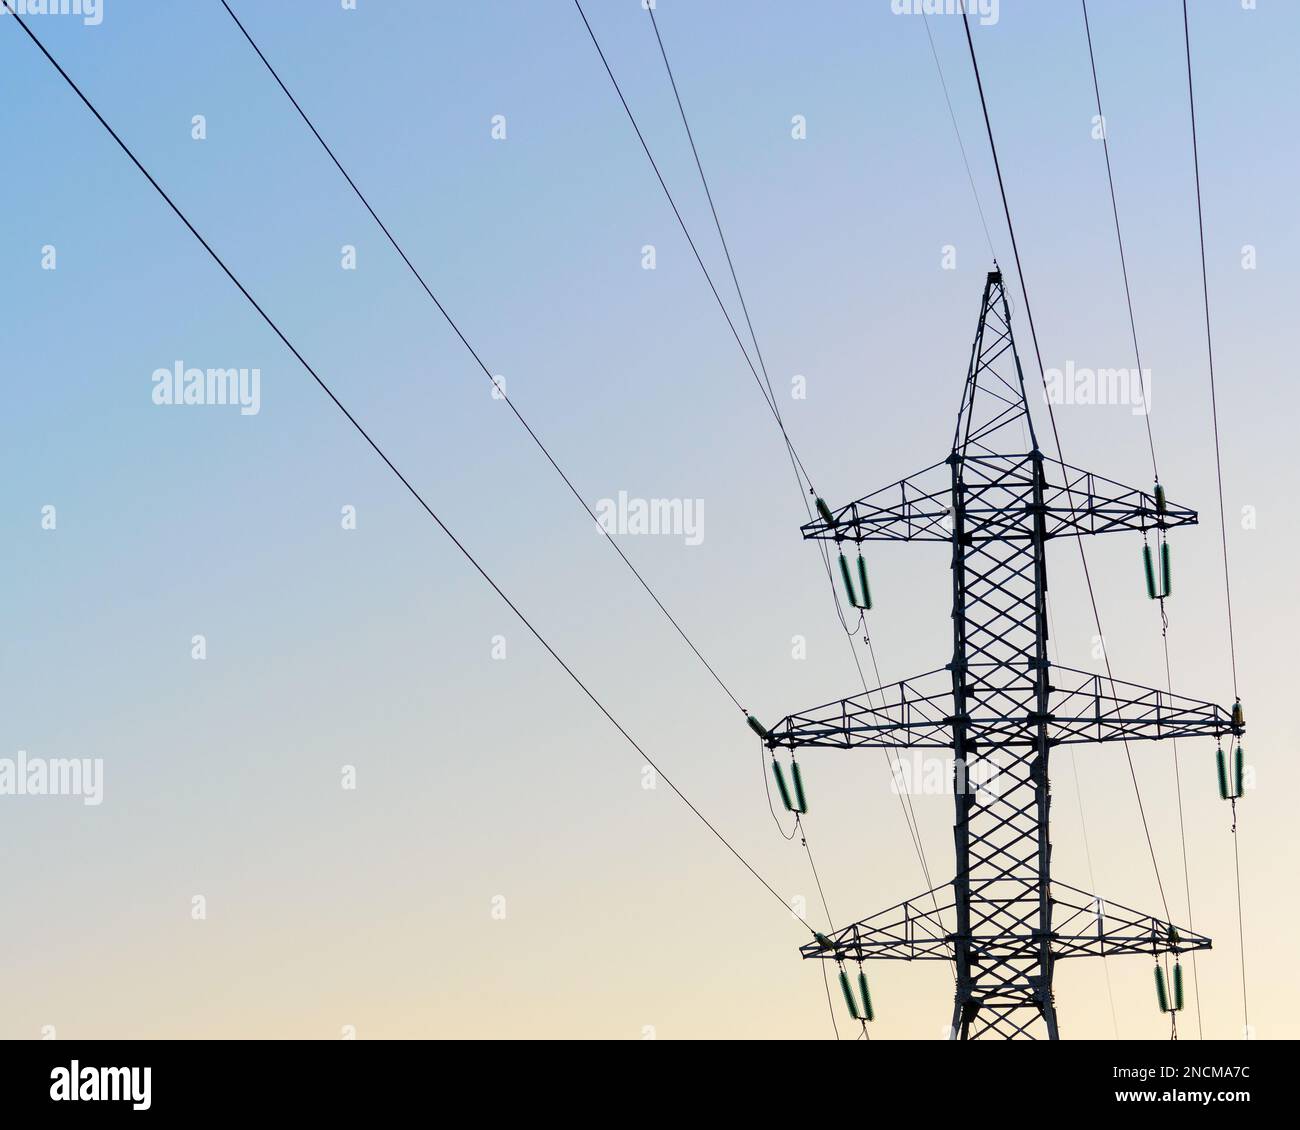 The tip end of the anchor supports of overhead power lines costs with wires and bundles of strands of high-voltage insulators against the clear blue s Stock Photo